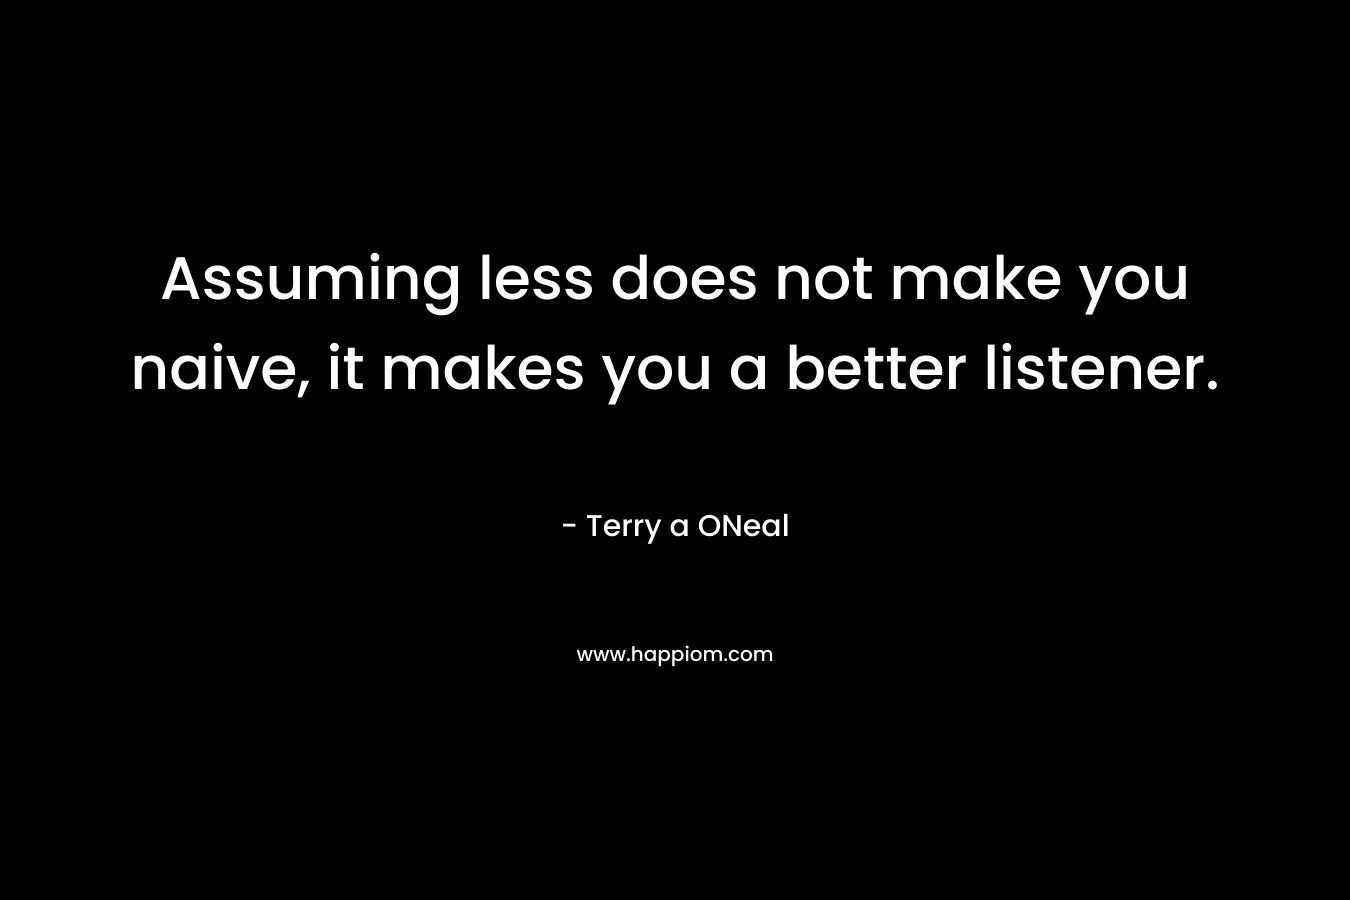 Assuming less does not make you naive, it makes you a better listener.